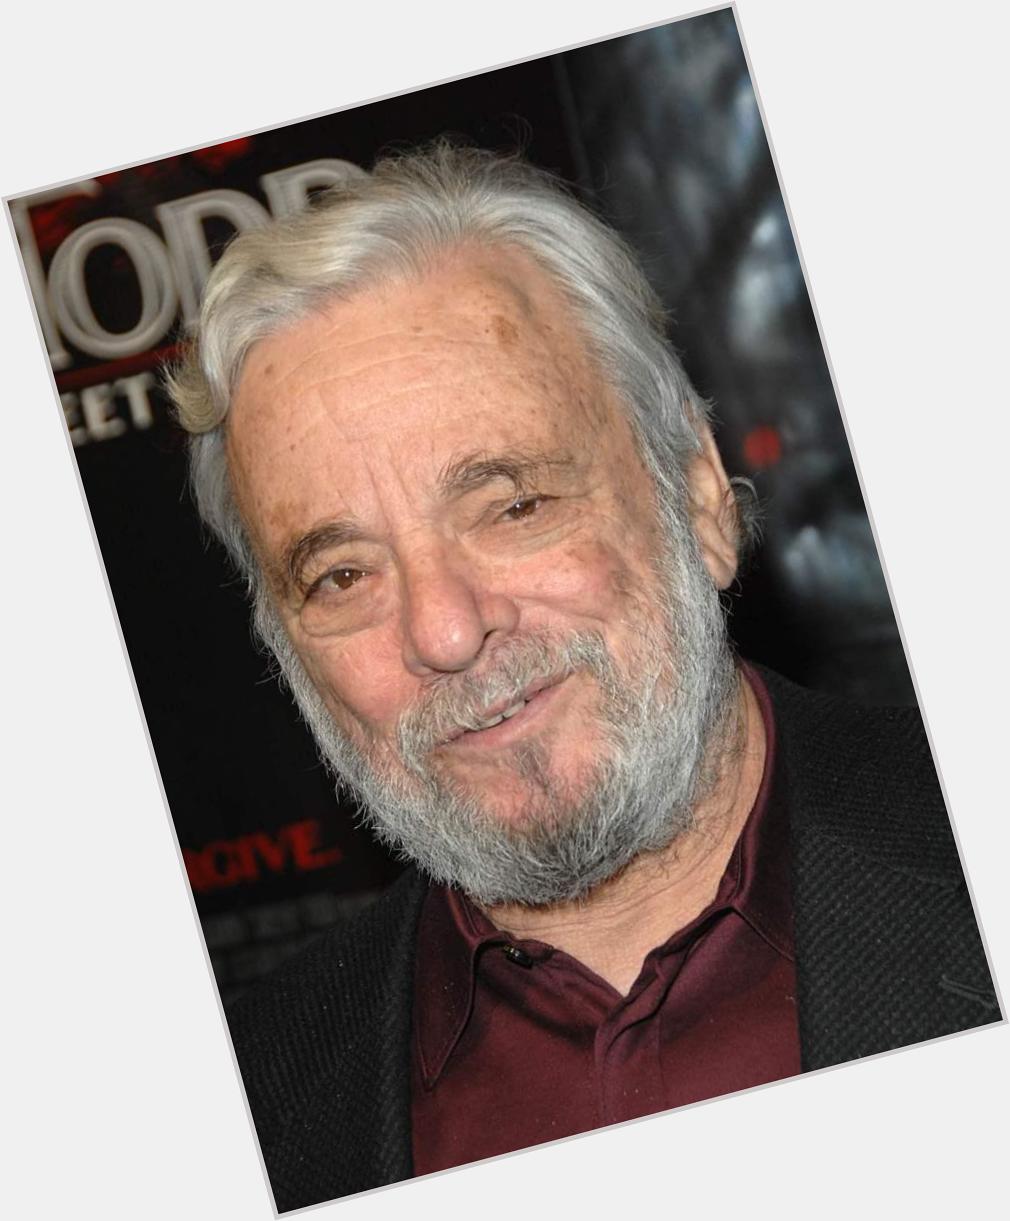 Happy 85th Birthday, Stephen Sondheim!

Thanks for all the great show tunes I belt out when no one is around. 